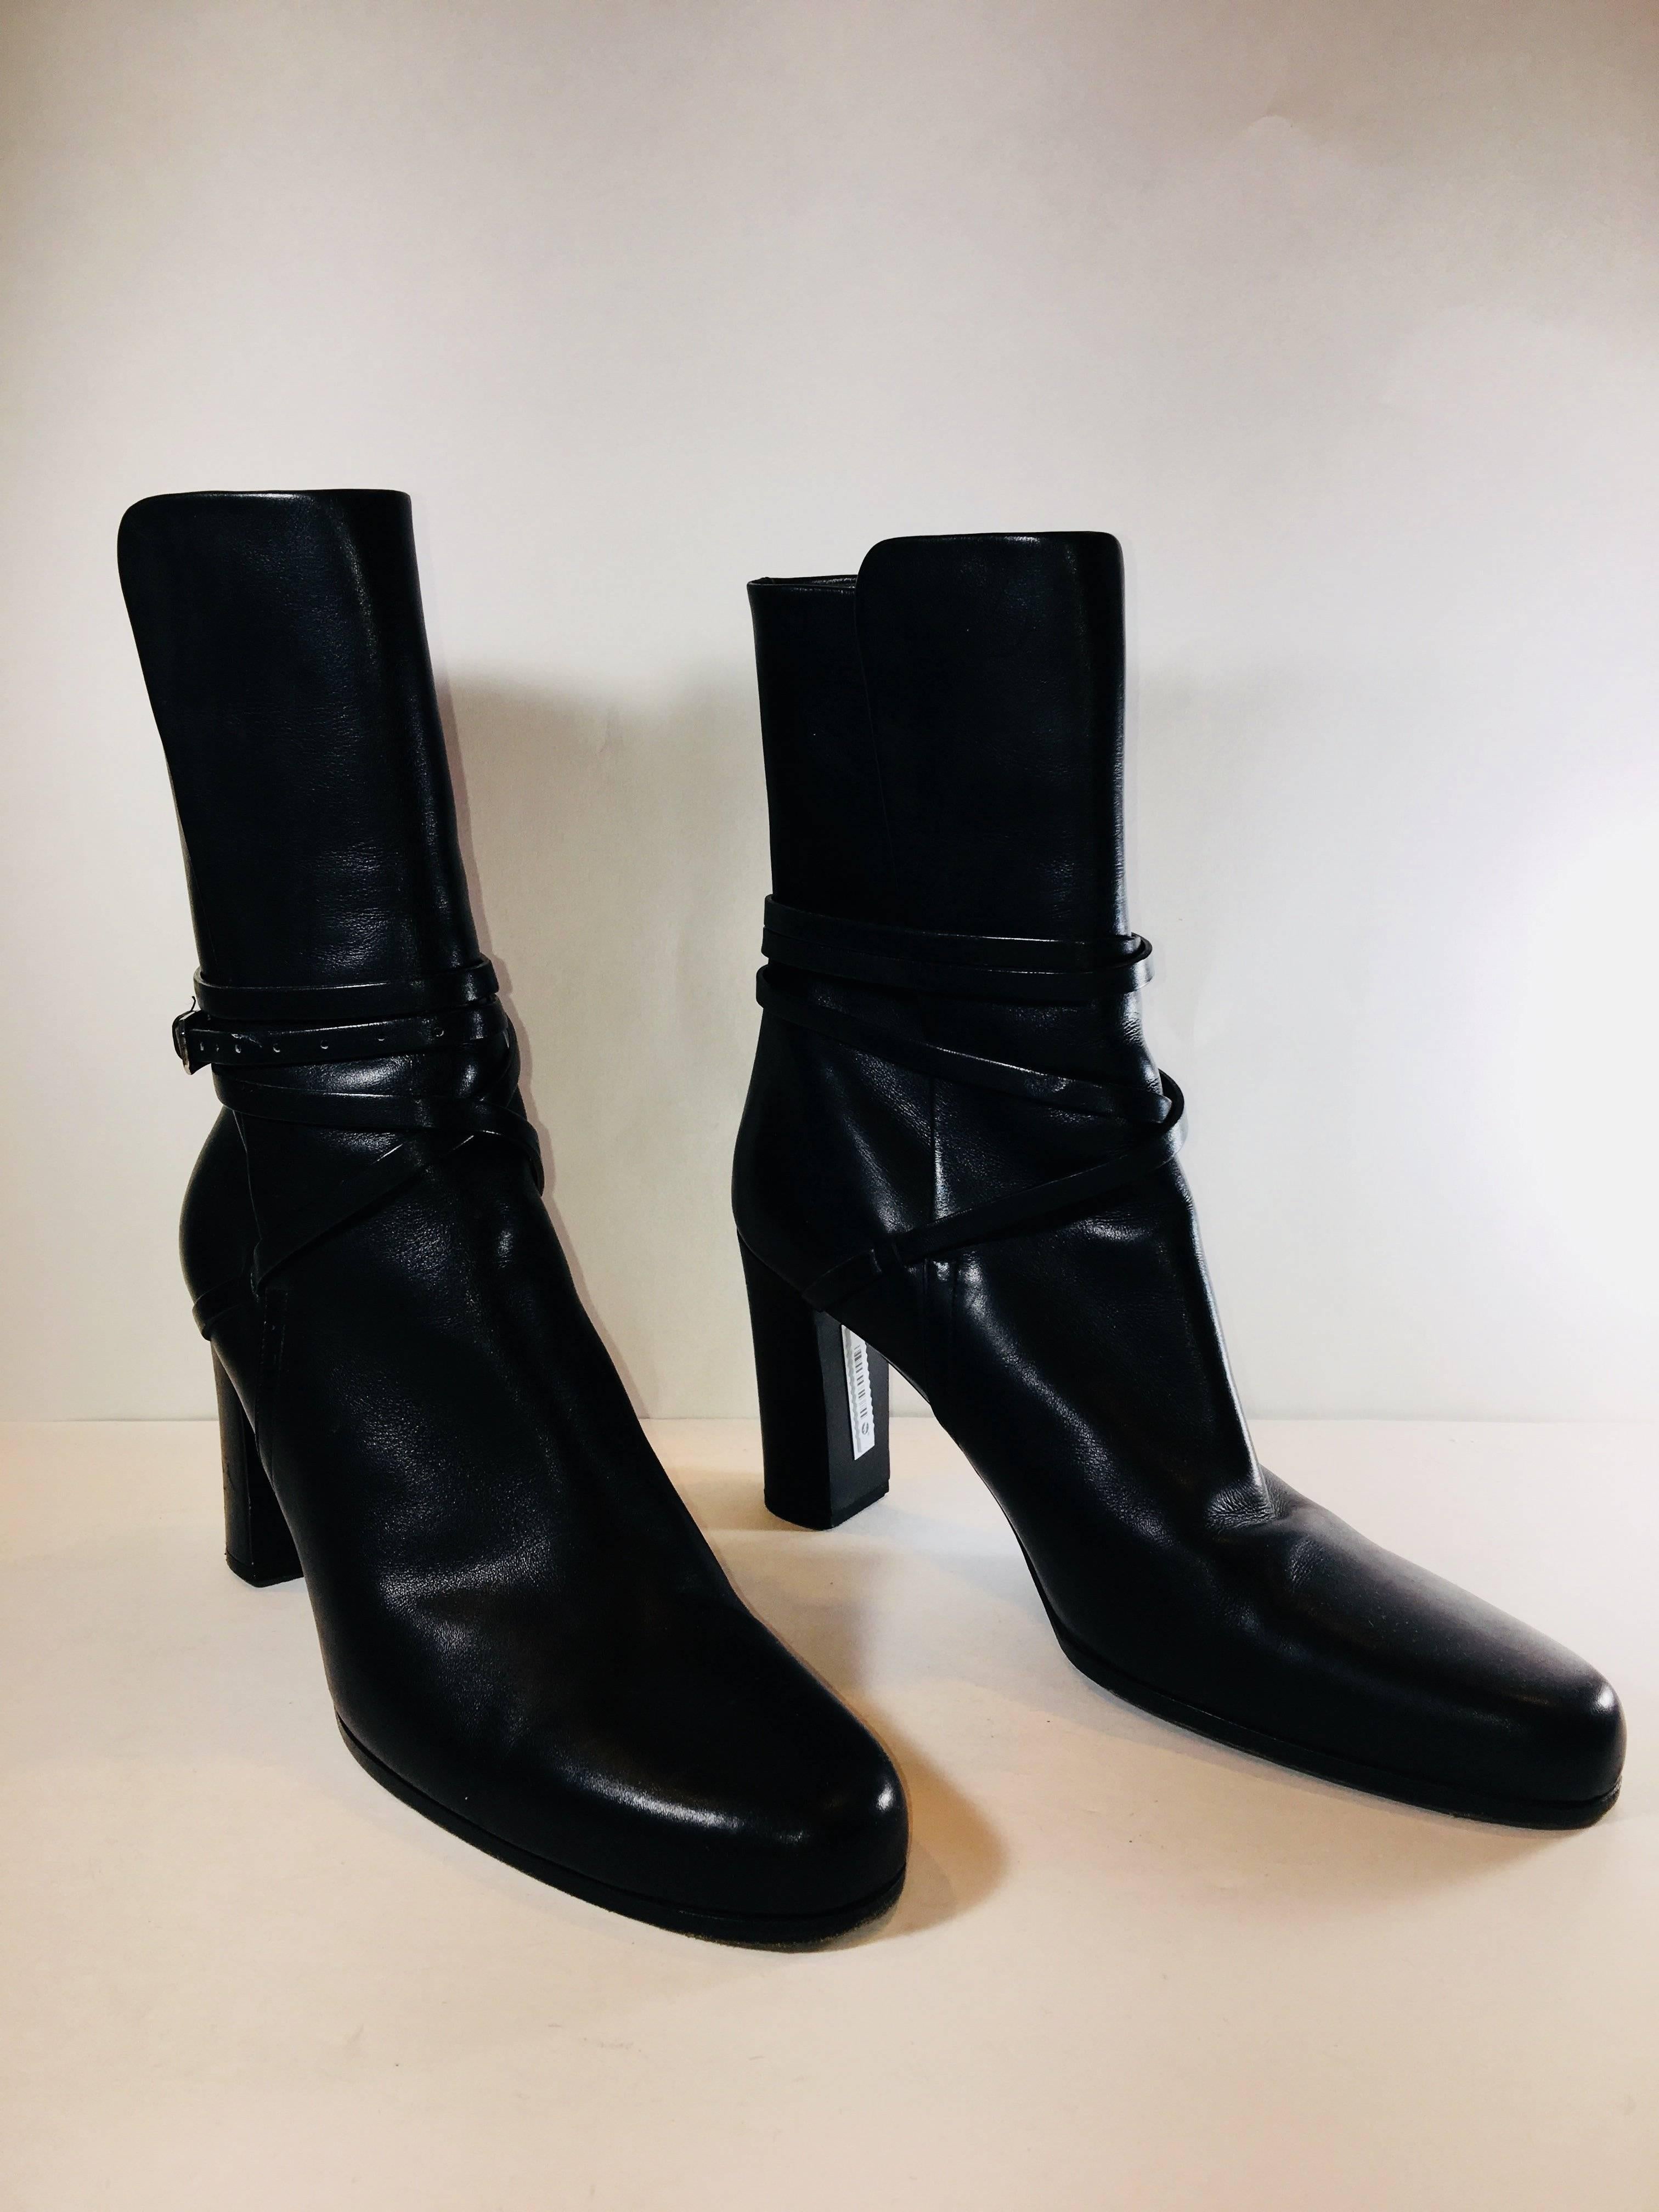 Jil Sander Leather Wrap, High Heel Boots with Round Toe. 